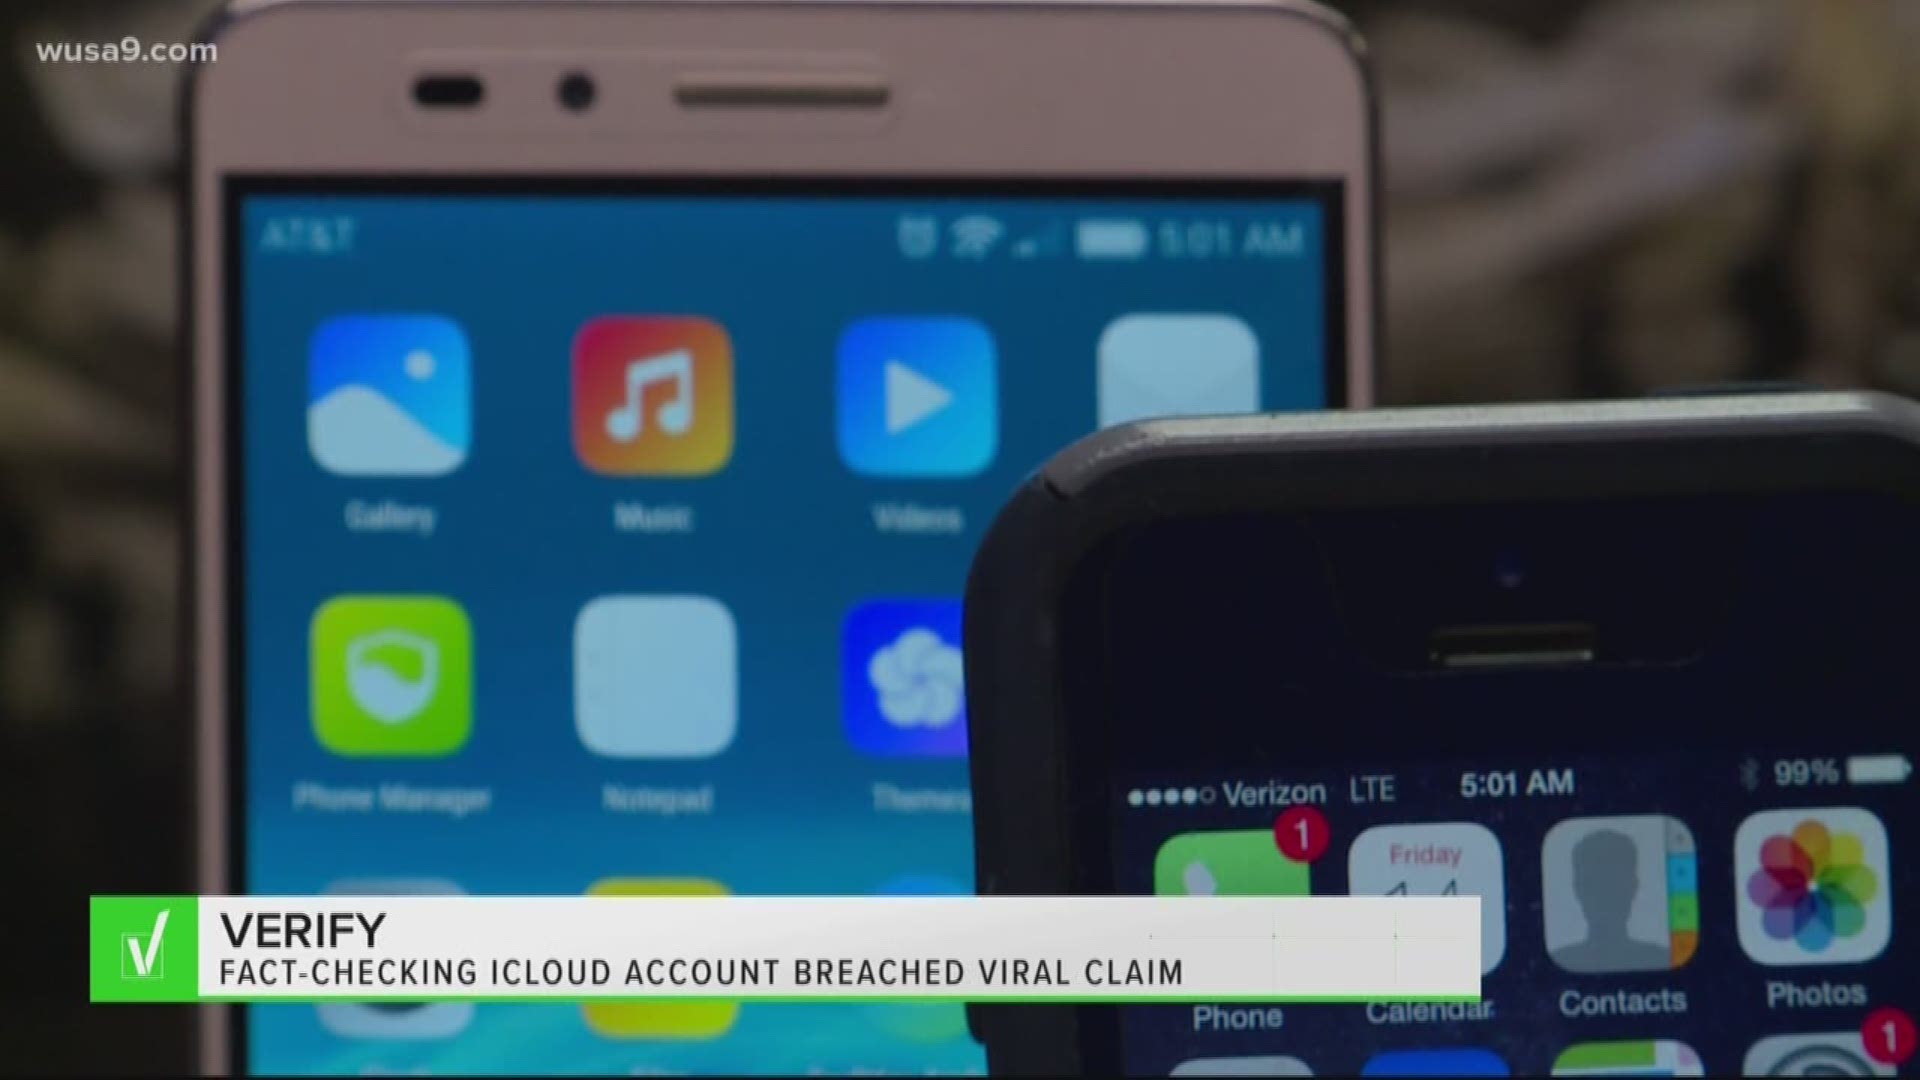 Apple doesn't just call you. If you get a call, hang up! Beware of this scam.